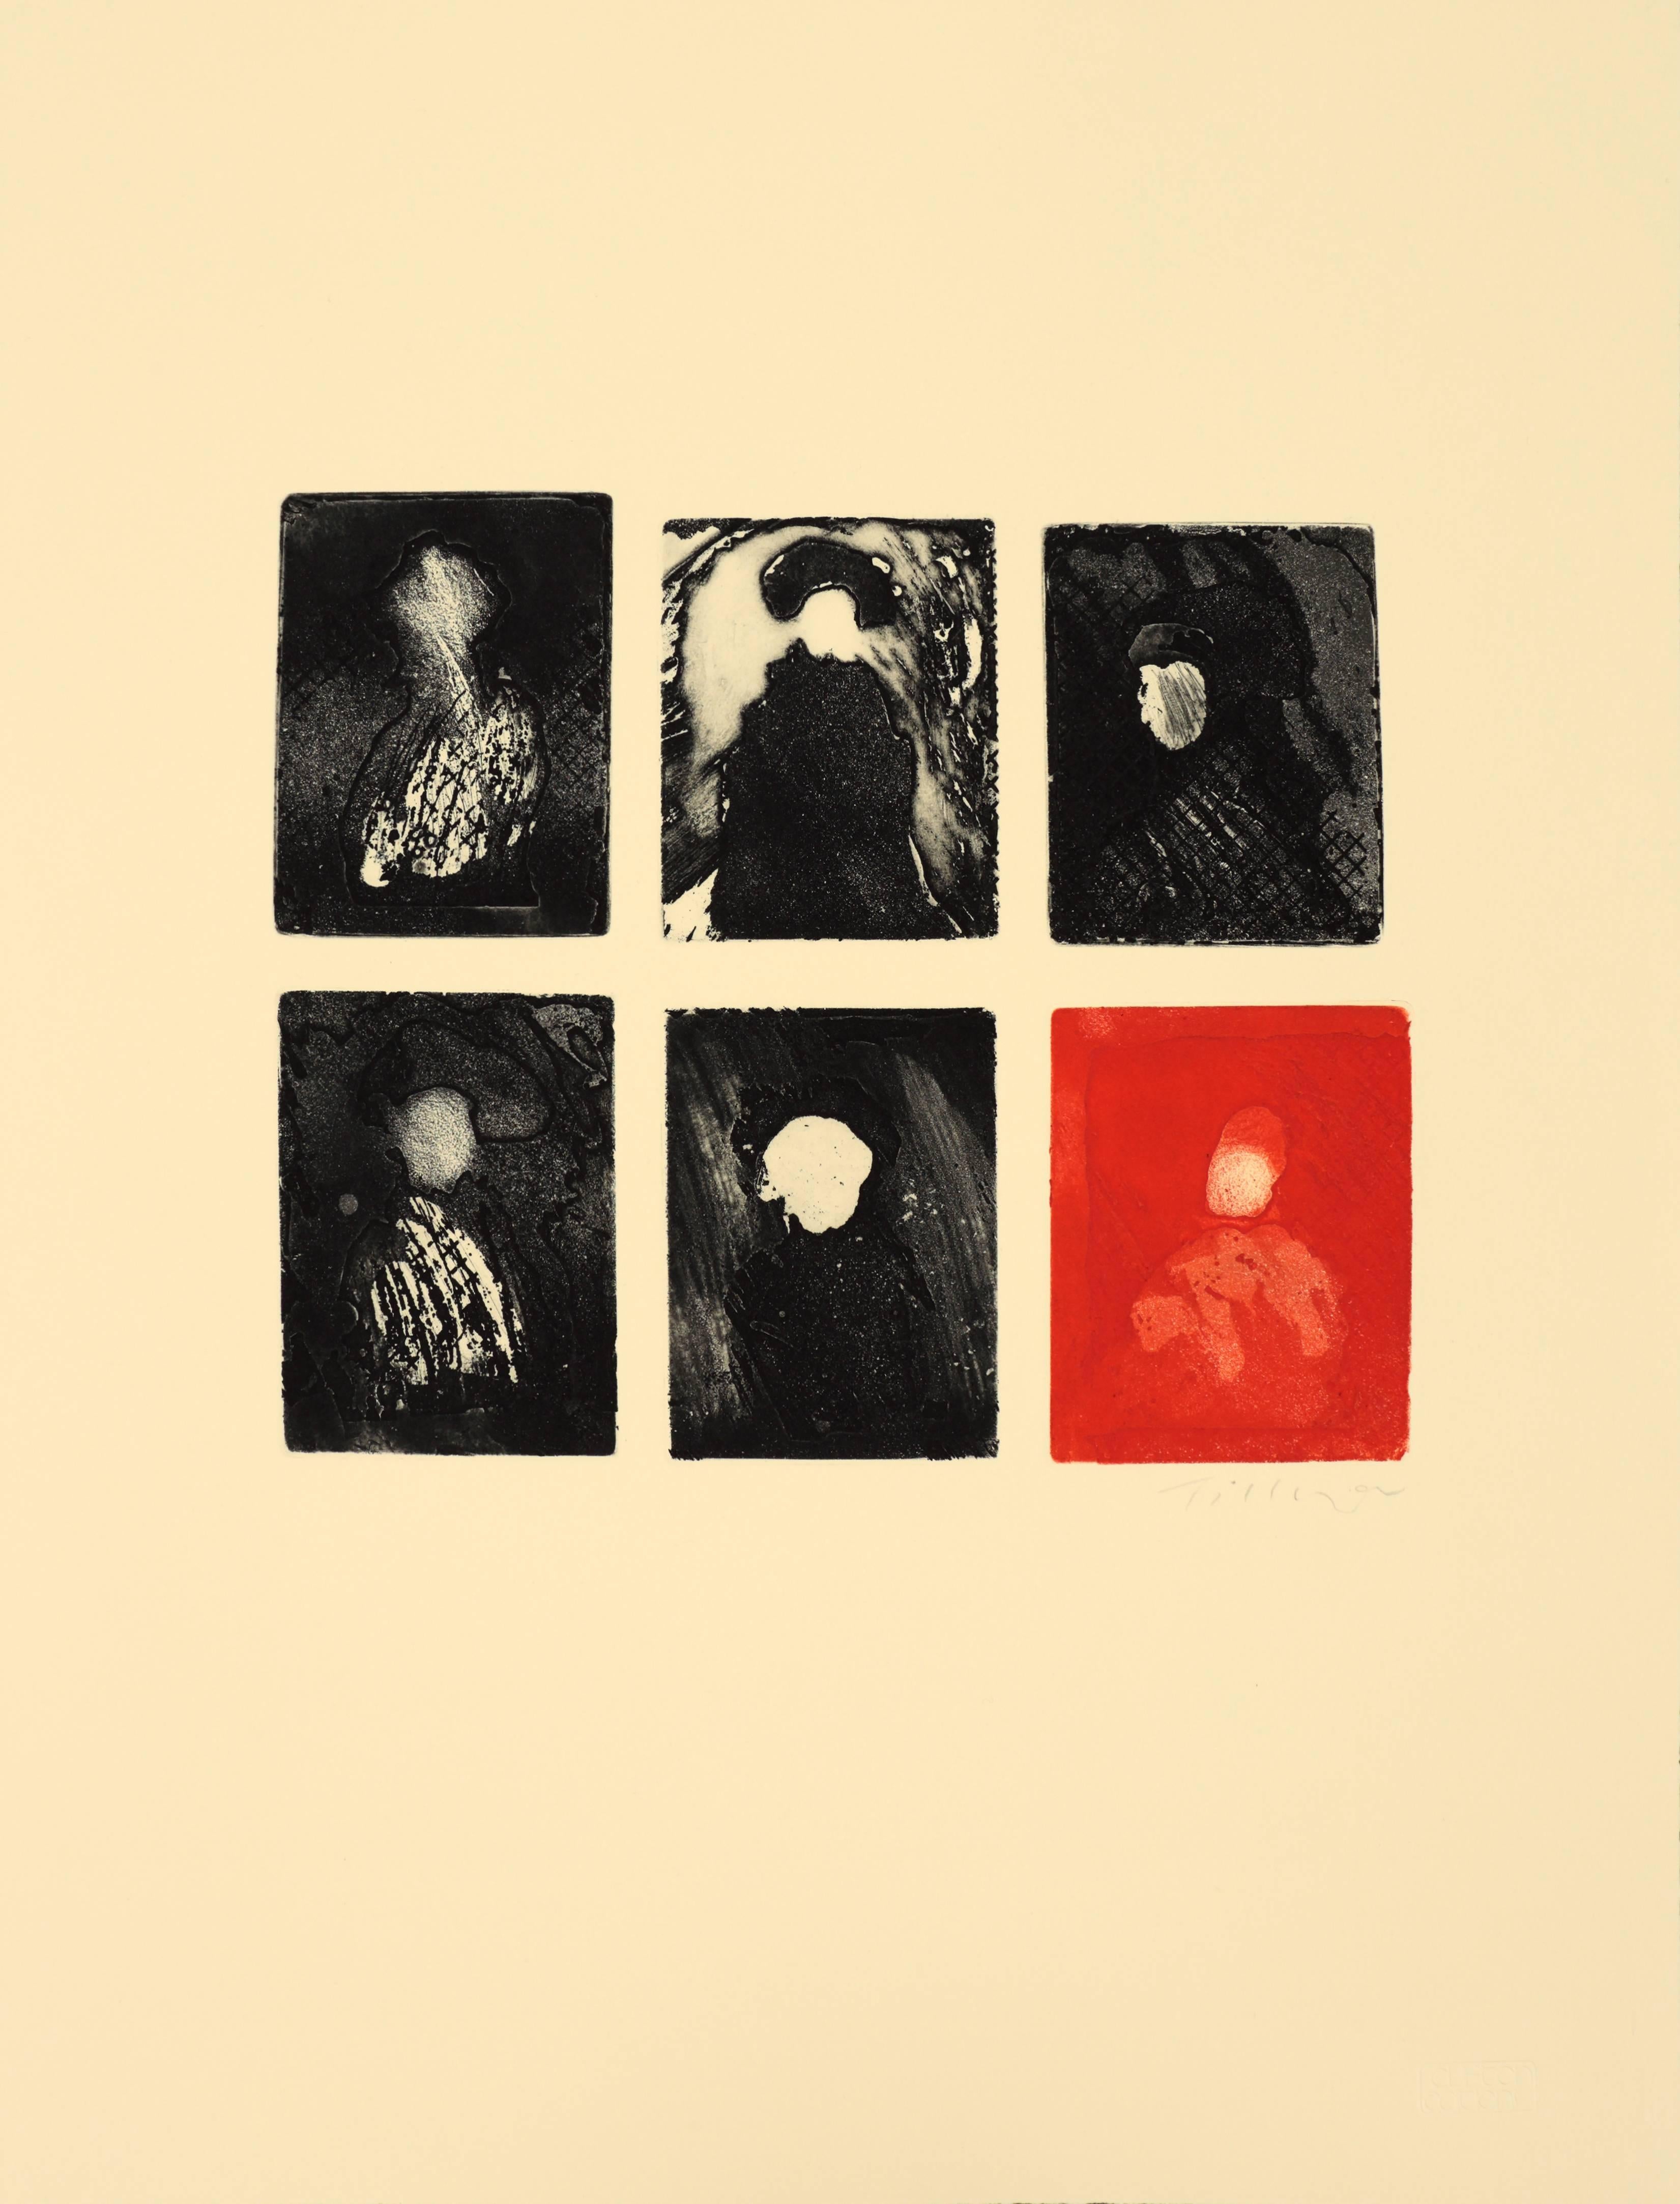 William Tillyer Abstract Print - The Descendents/Portraits - "Those high hung dark faceless portraits.."